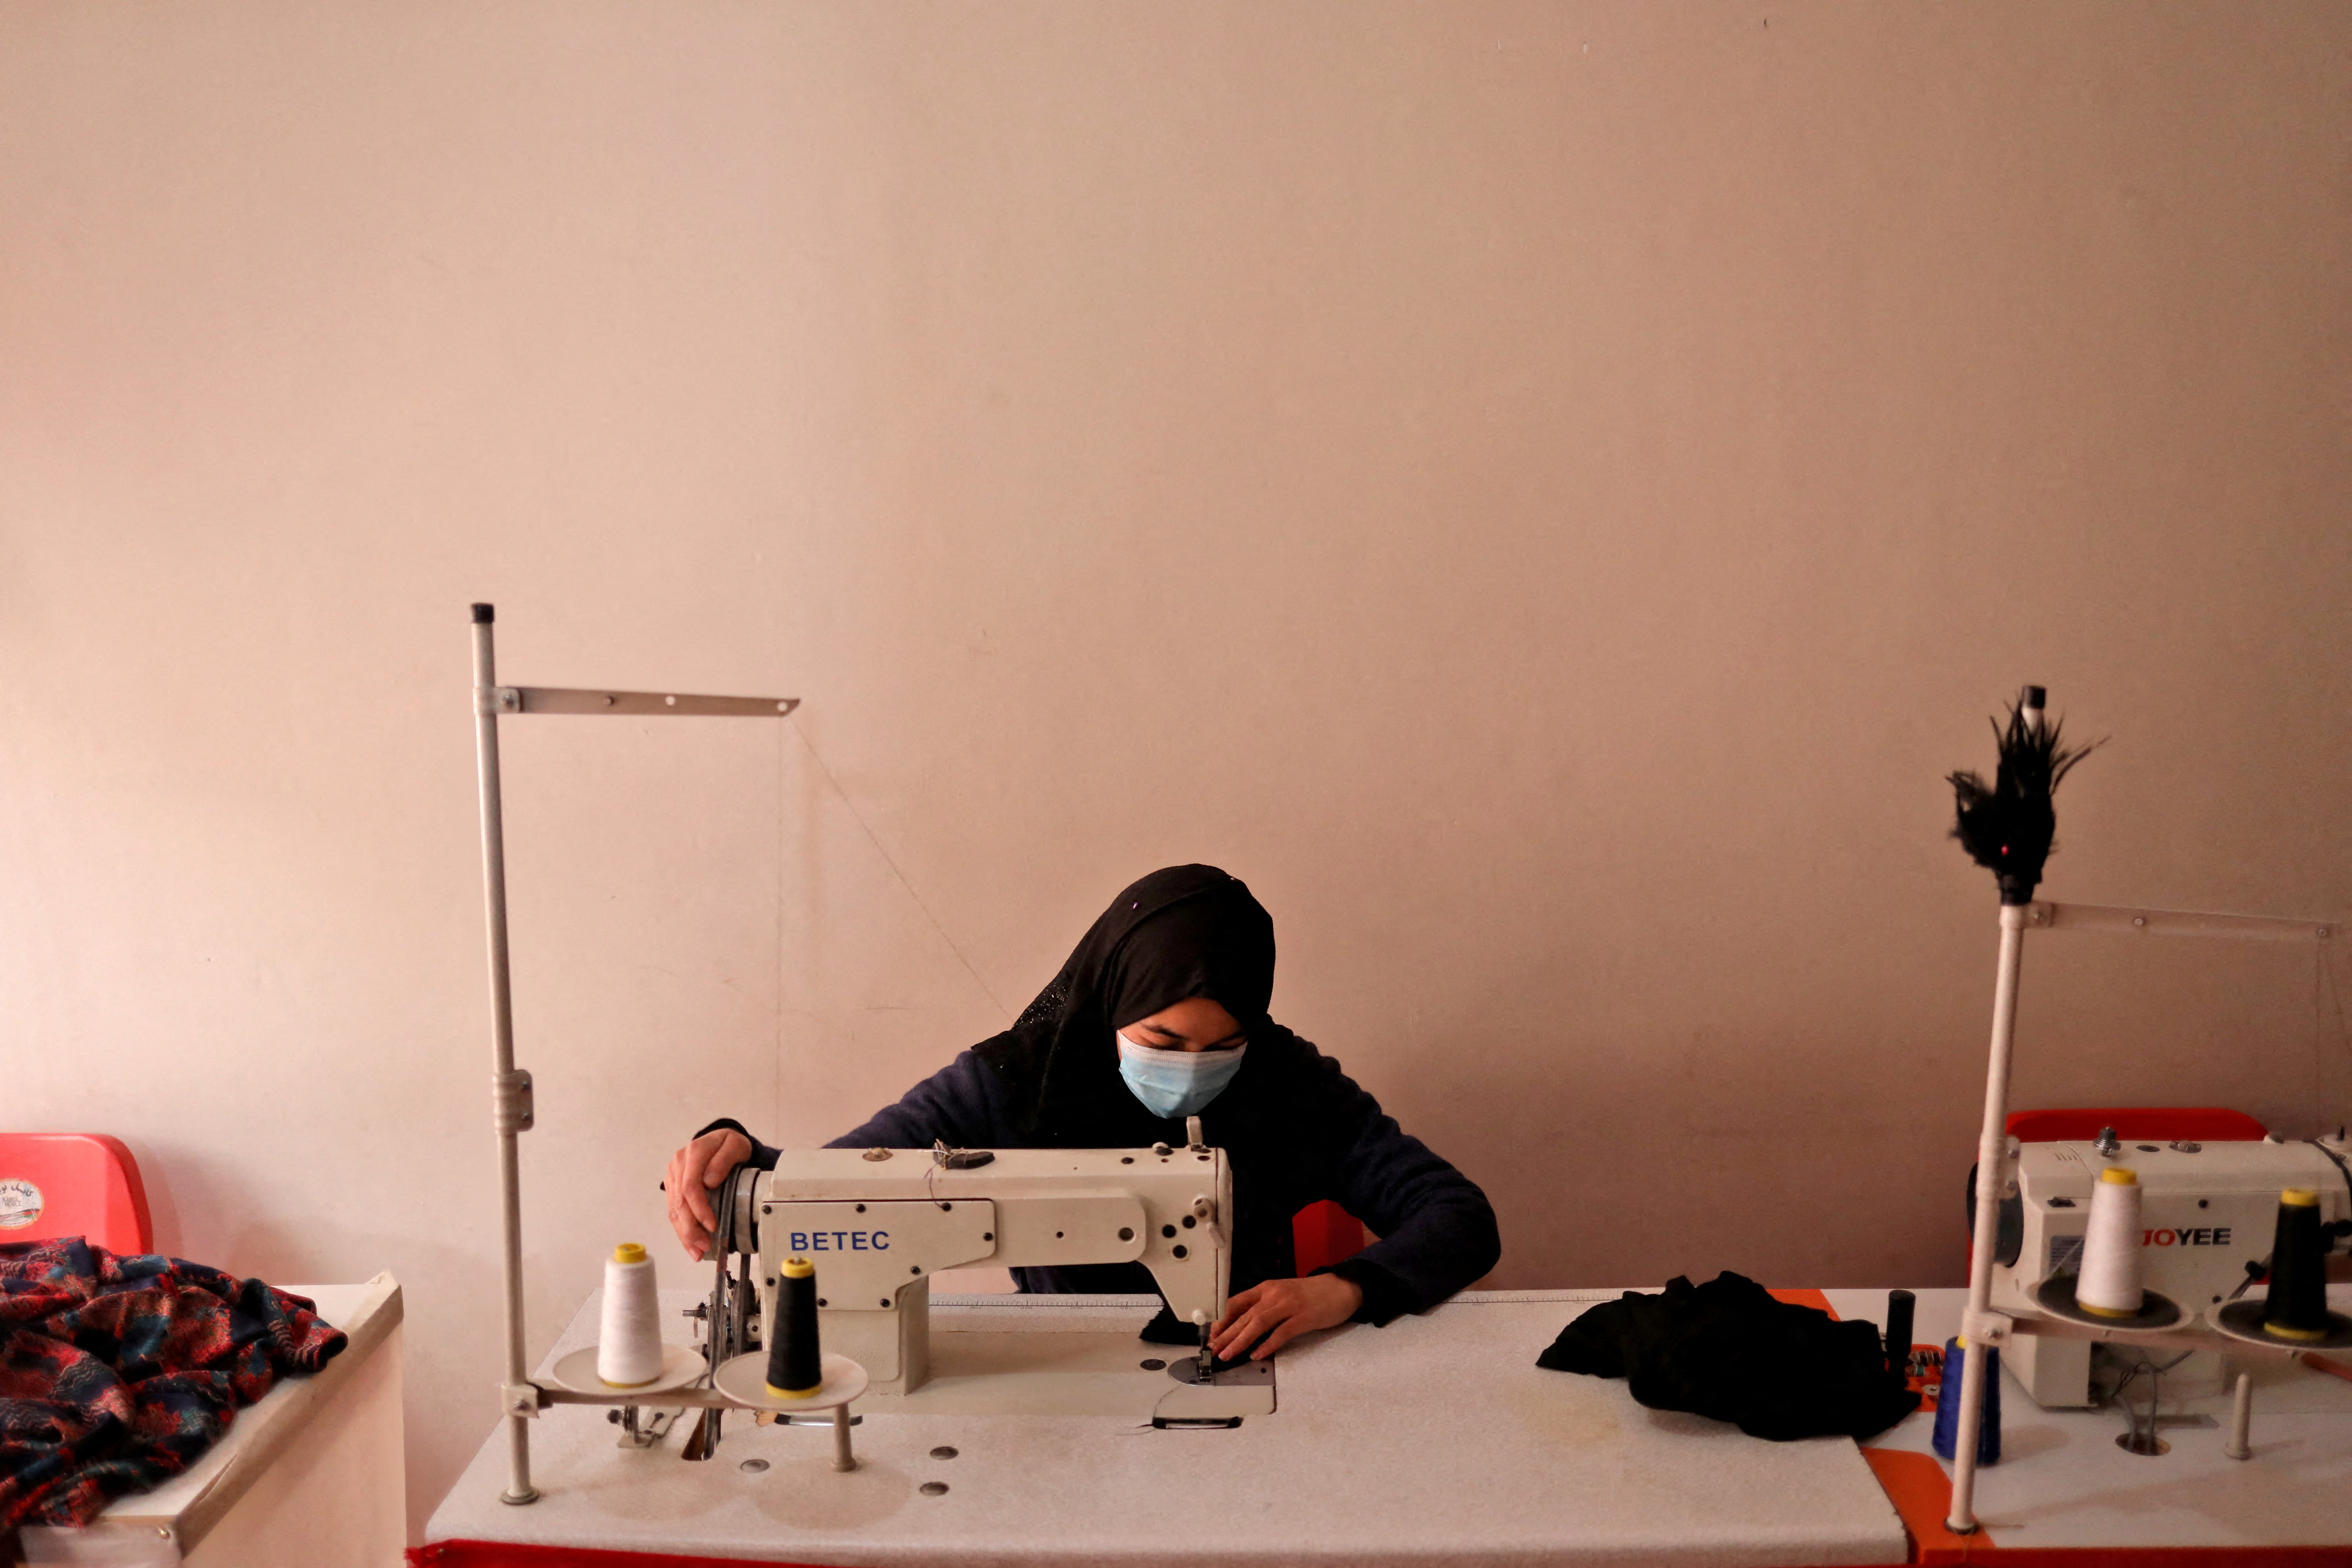 An Afghan woman uses a sewing machine to sew garments at a sewing workshop in Kabul